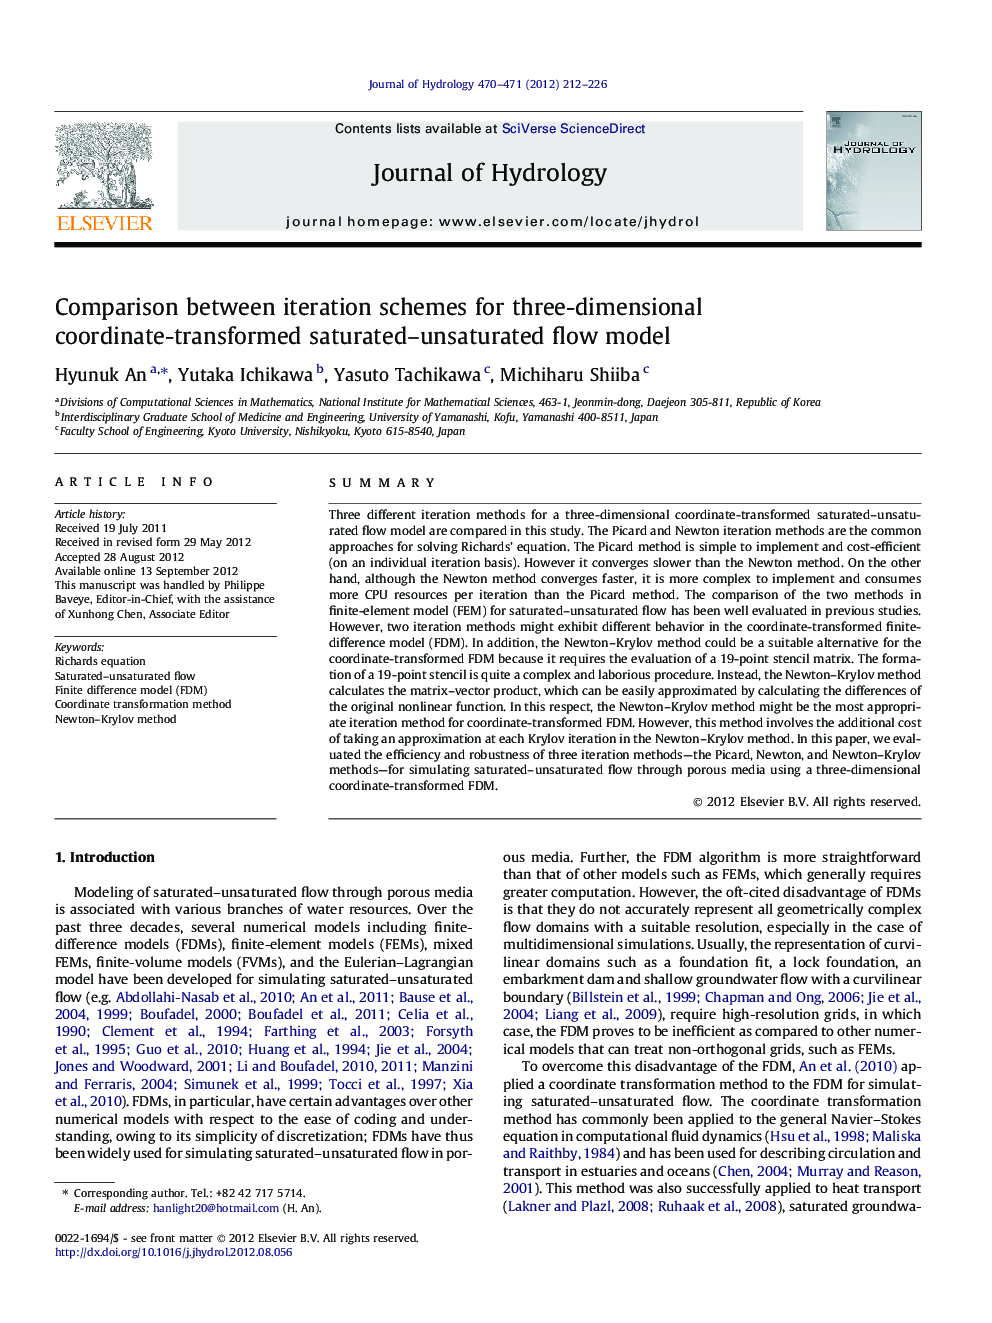 Comparison between iteration schemes for three-dimensional coordinate-transformed saturated–unsaturated flow model